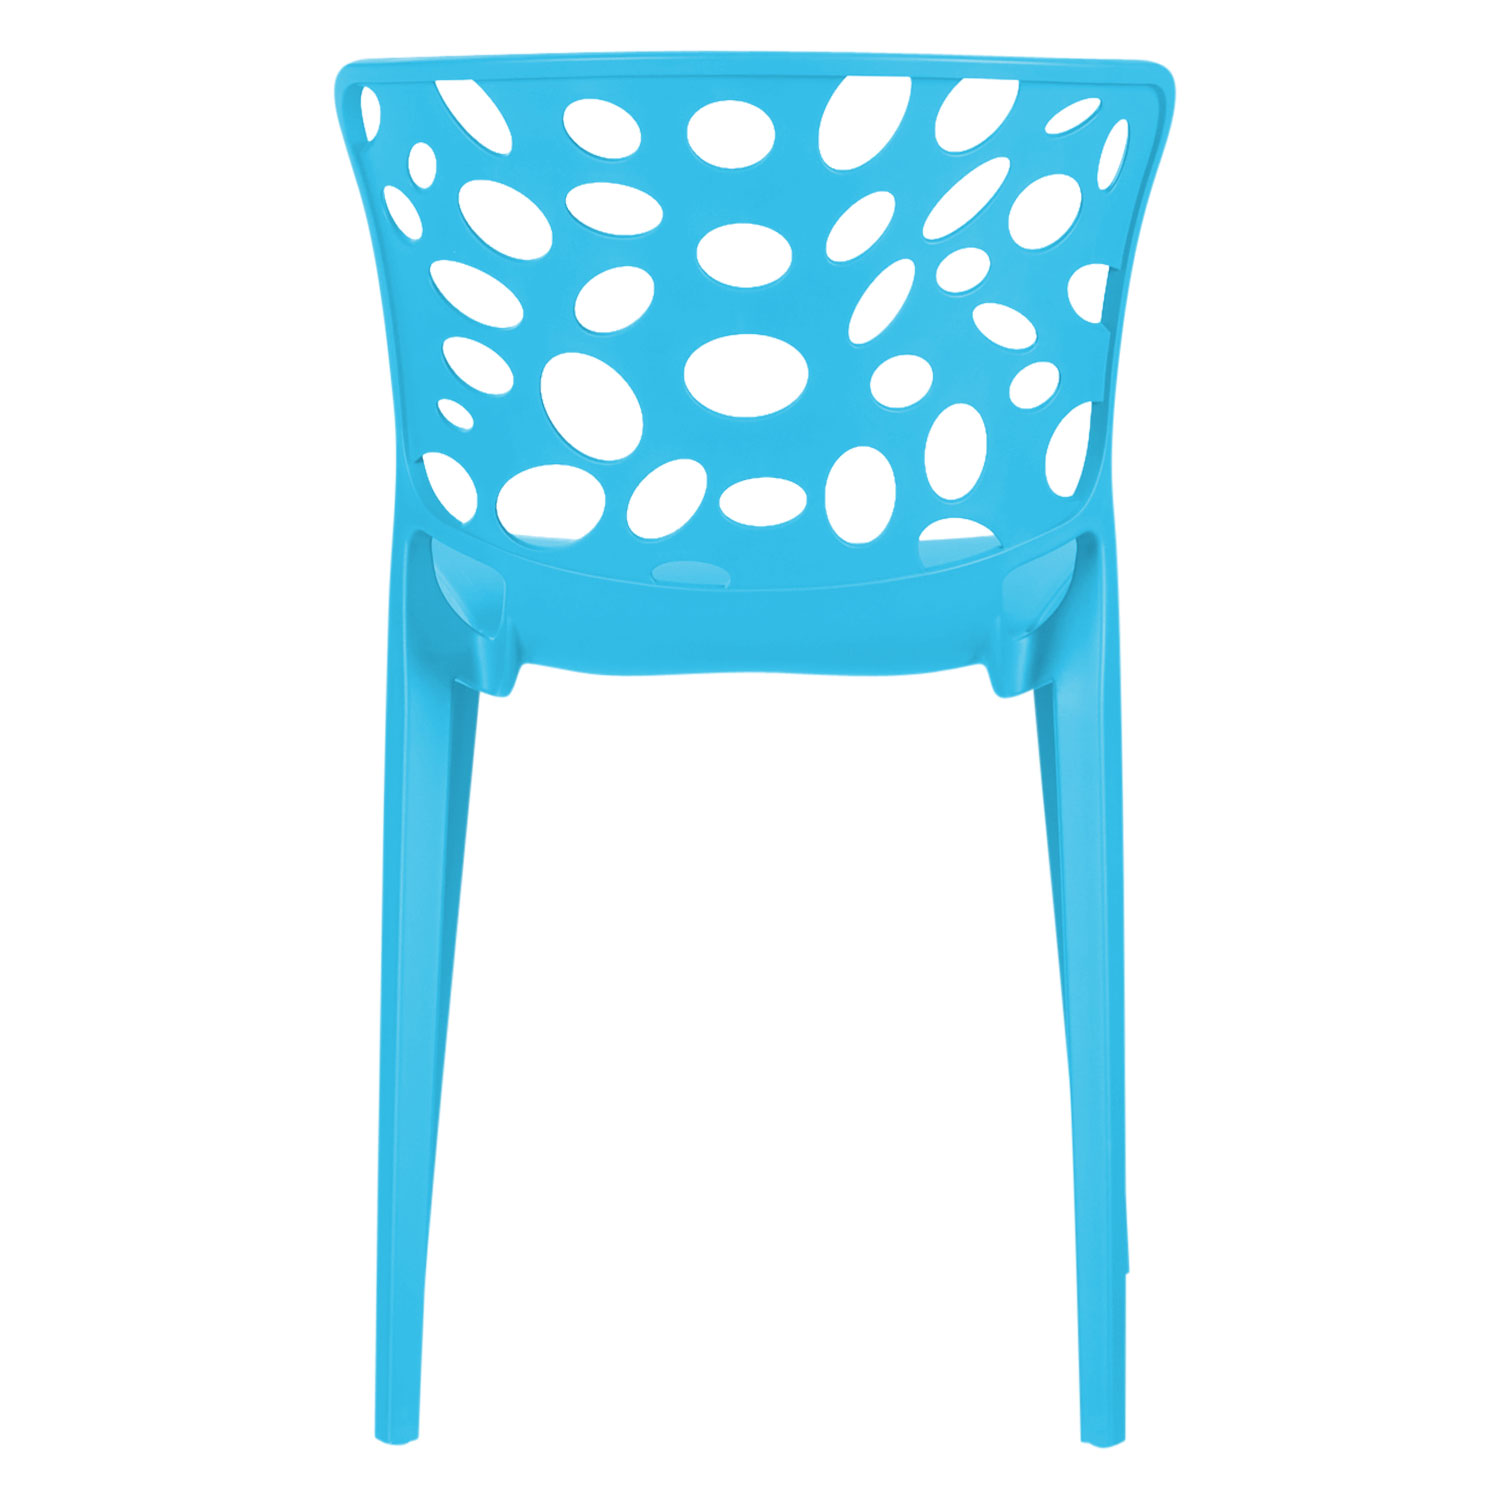 Garden chair Set of 4 Modern Blue Camping chairs Outdoor chairs Plastic Stacking chairs Kitchen chairs